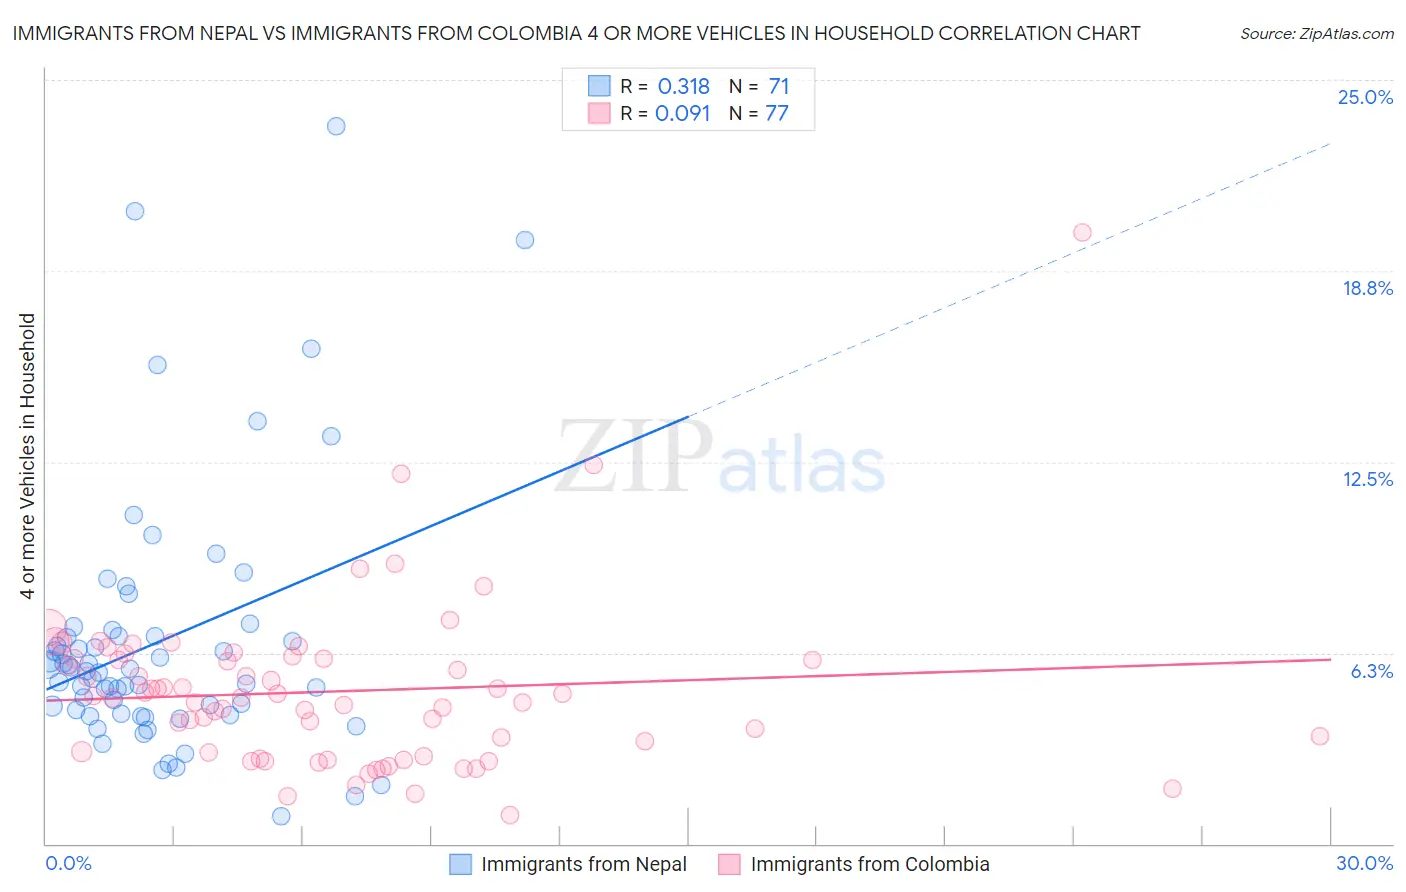 Immigrants from Nepal vs Immigrants from Colombia 4 or more Vehicles in Household